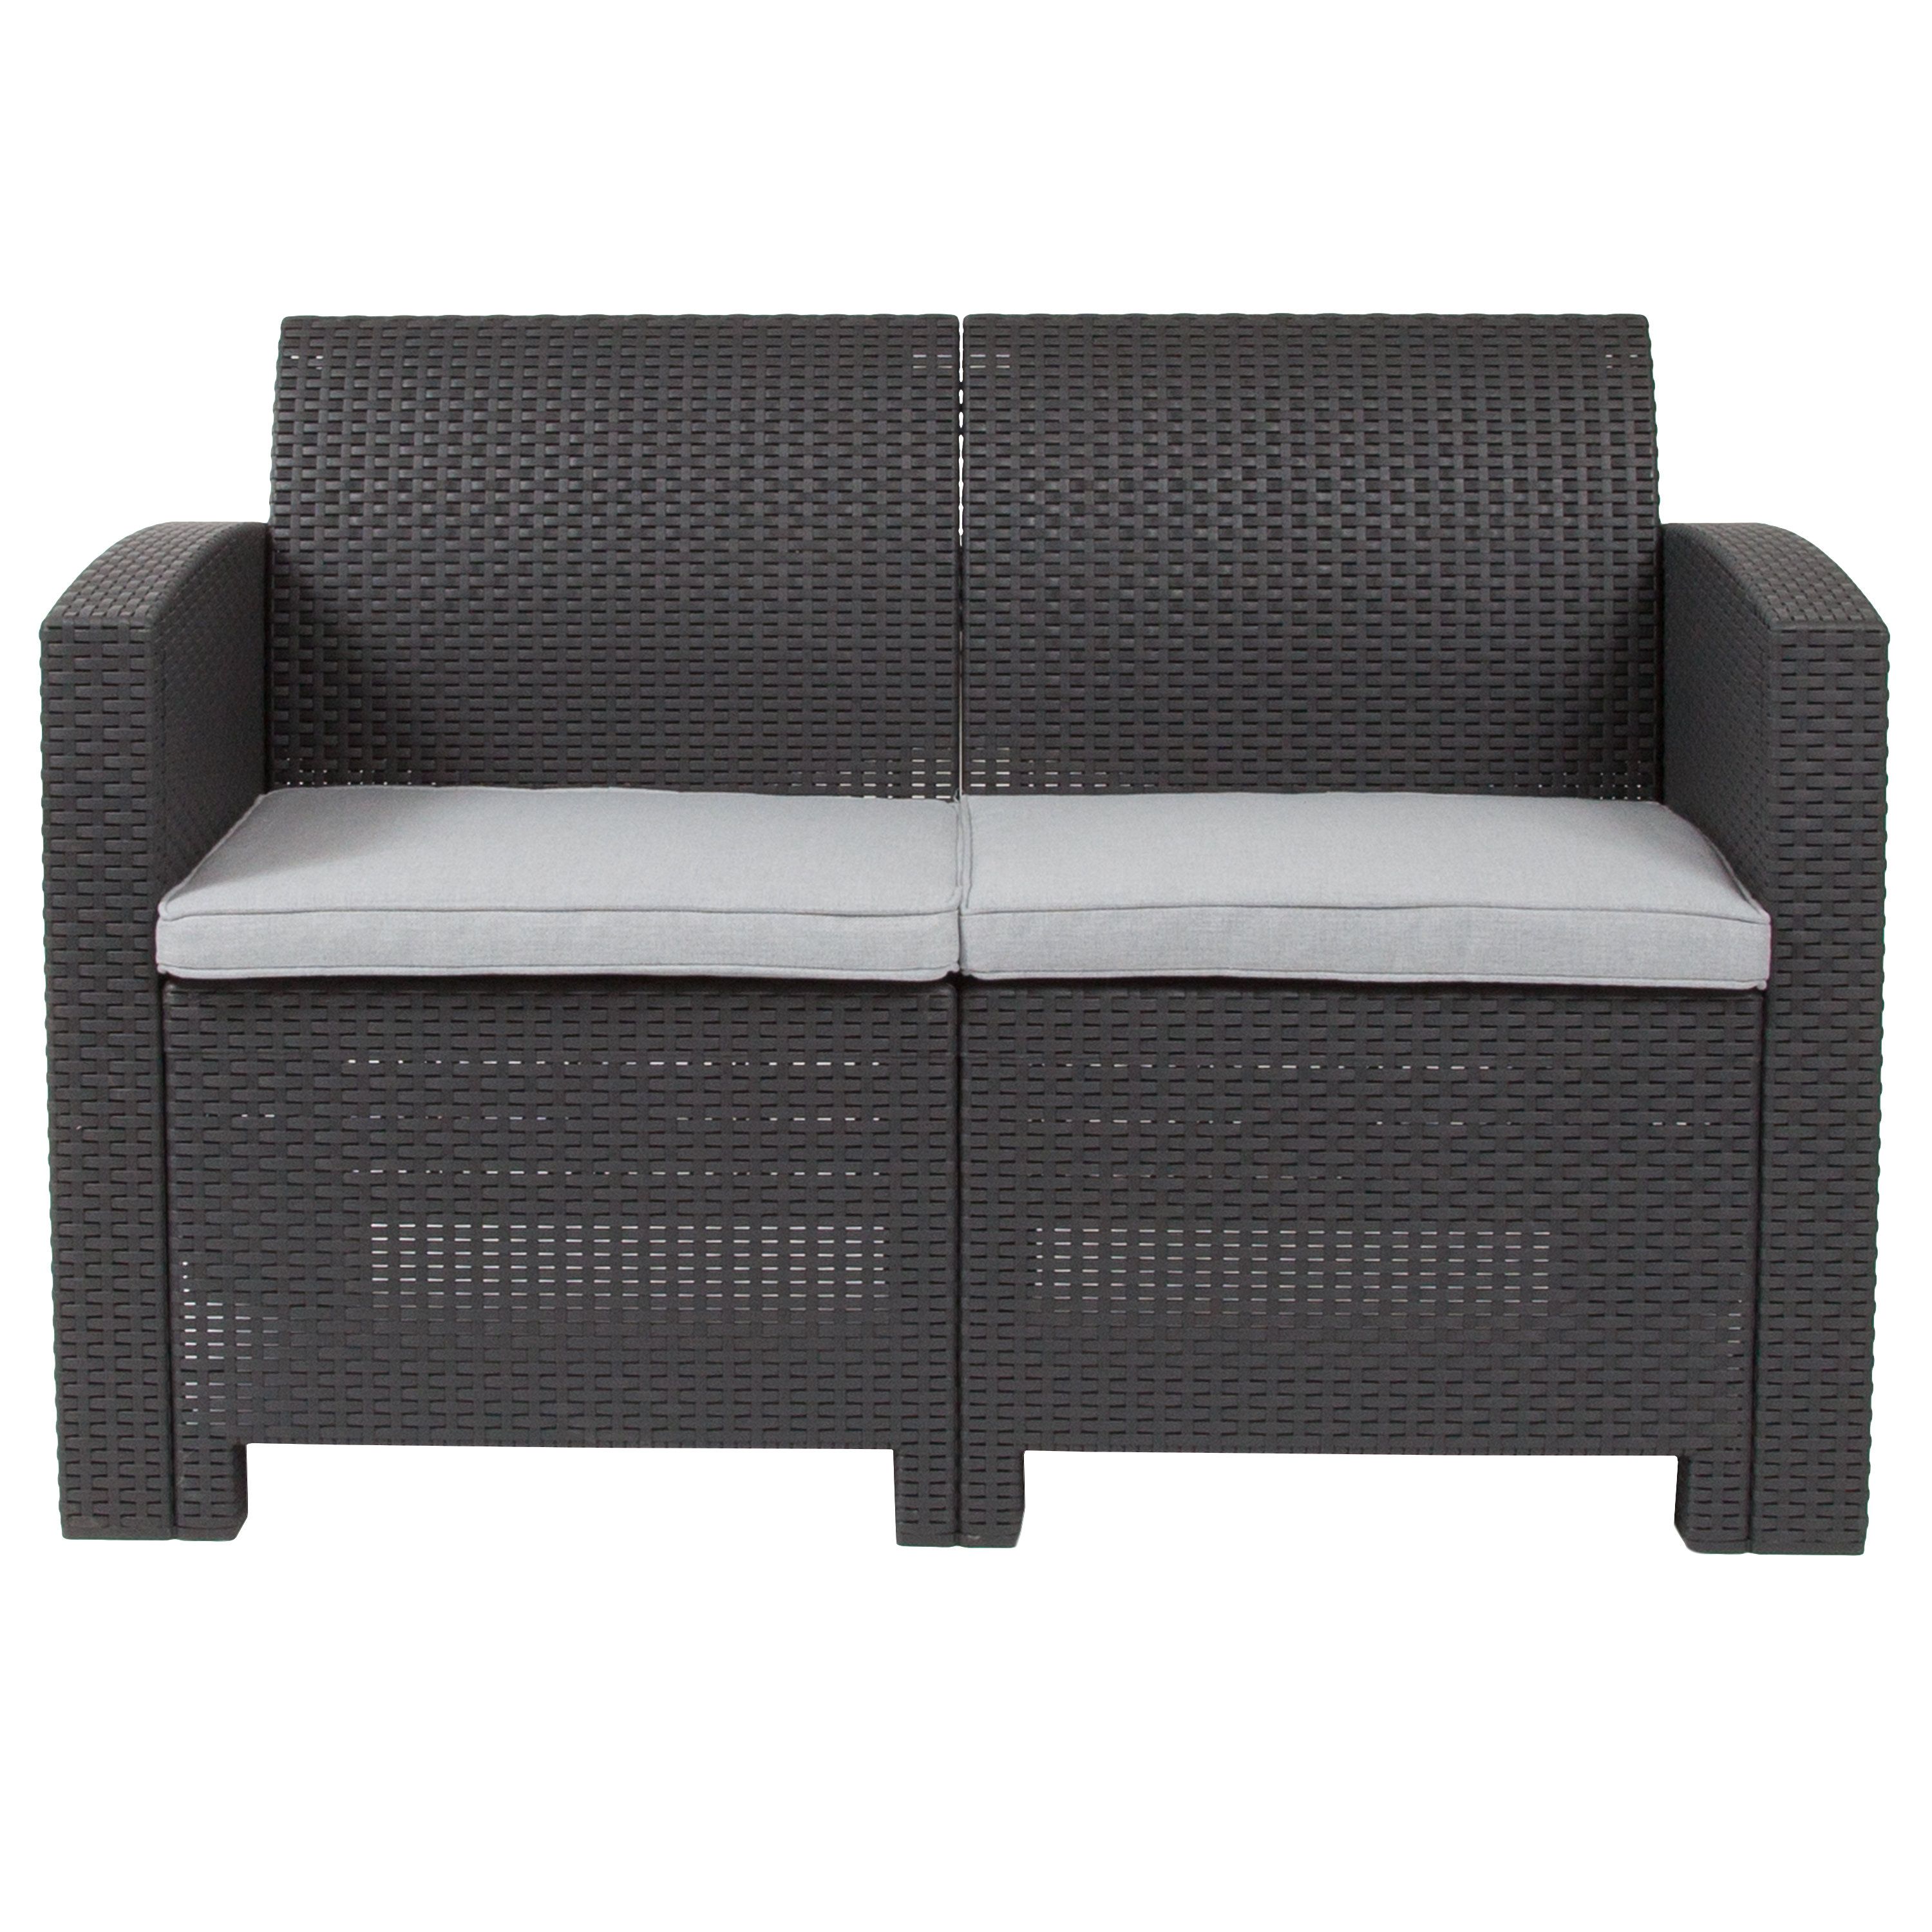 Stockwell Patio Sofas With Cushions Throughout Widely Used Stockwell Loveseat With Cushions (Photo 3 of 20)